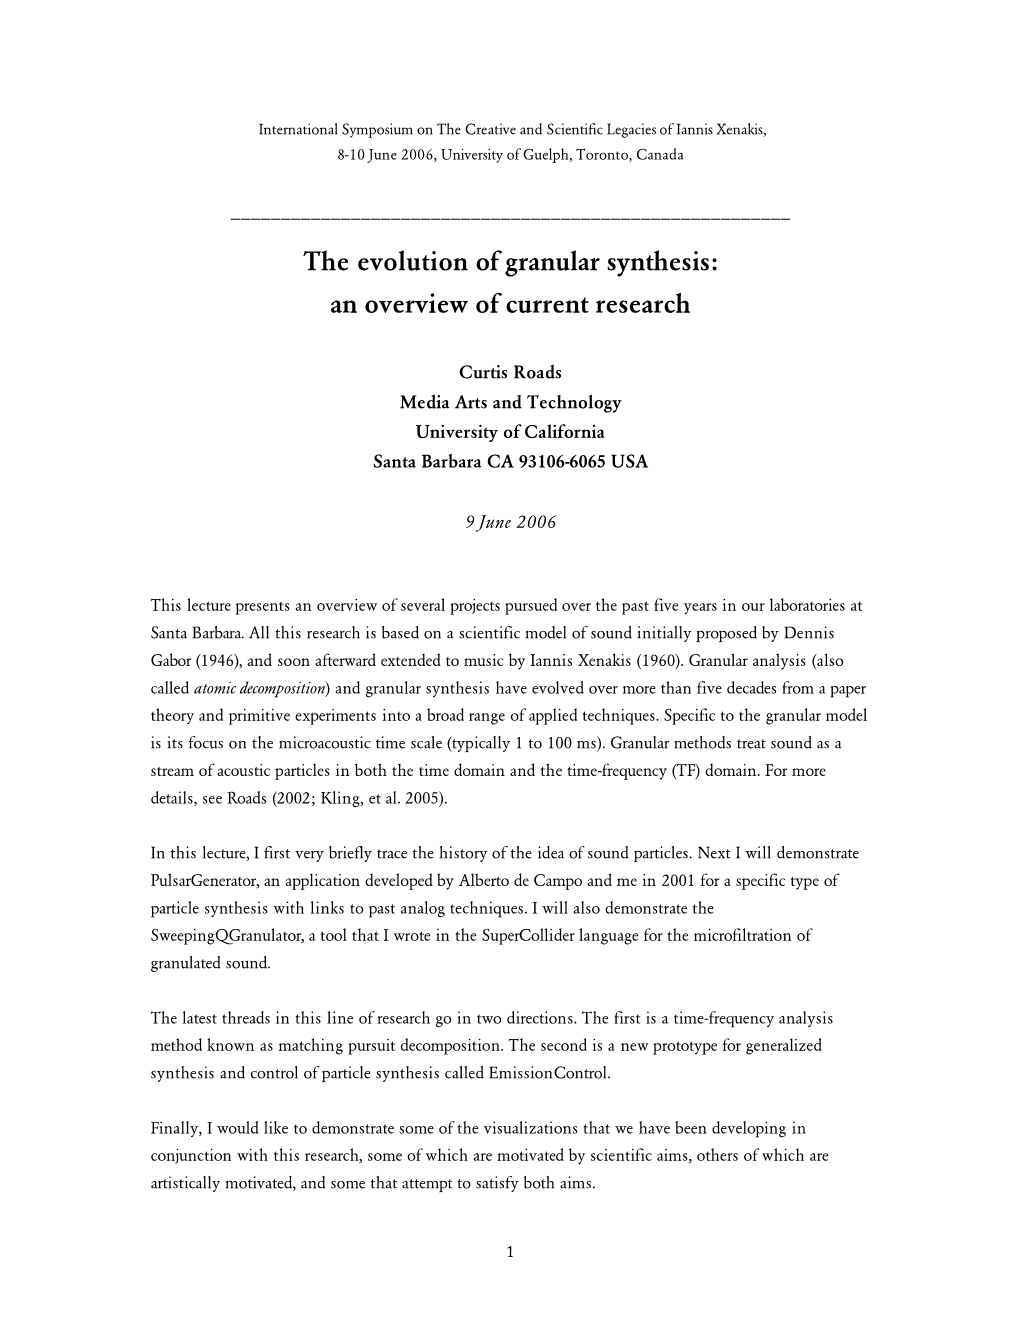 The Evolution of Granular Synthesis: an Overview of Current Research